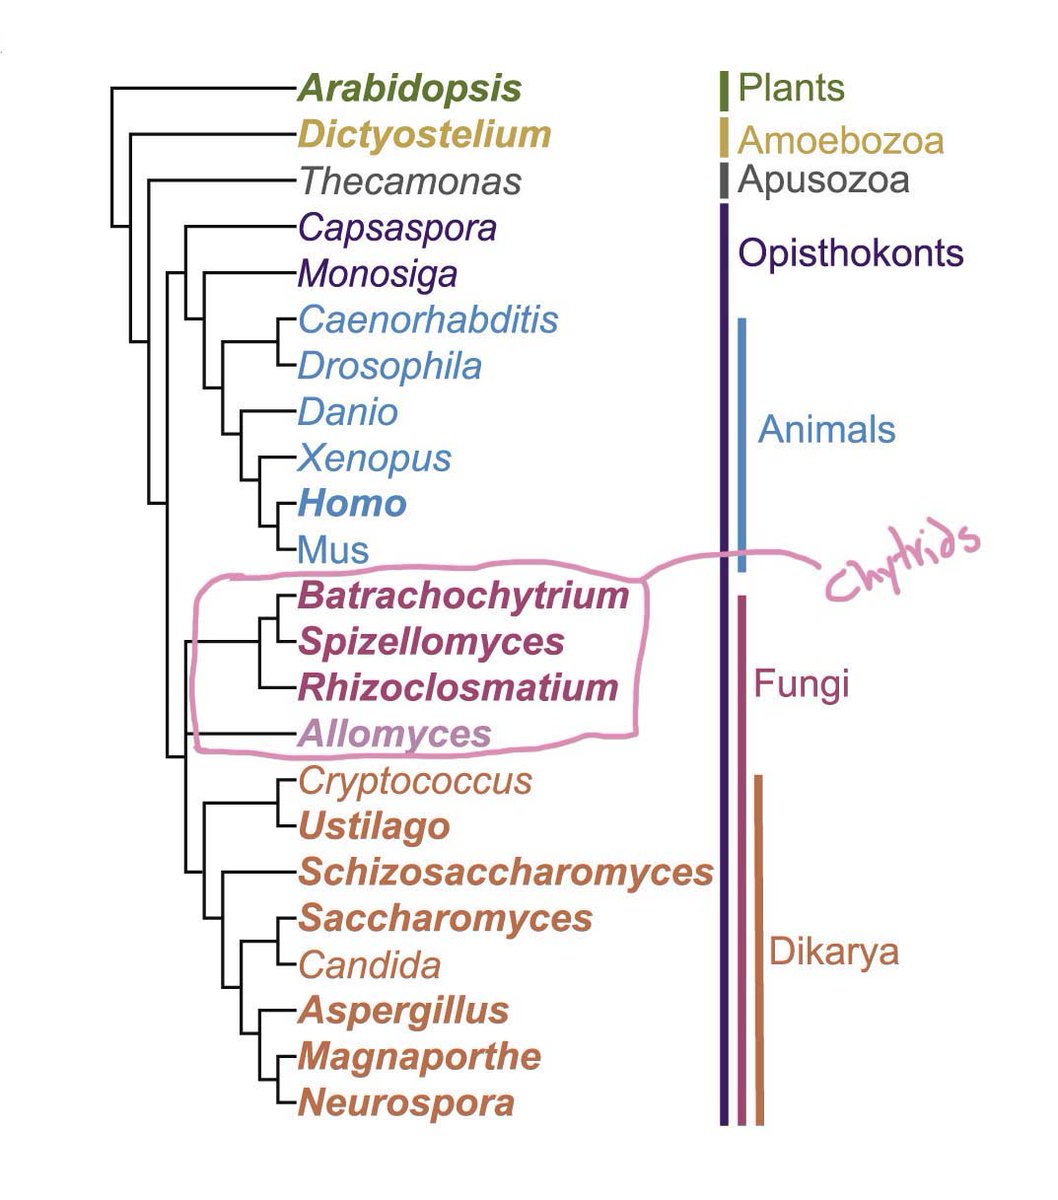 You may be asking yourself “what in the world is a chytrid fungus?” well, chytrid fungi are deep branching fungi, which puts them in a great position to study the evolution of actin networks as well as give insight to the regulation of actin in animals (including us of course).